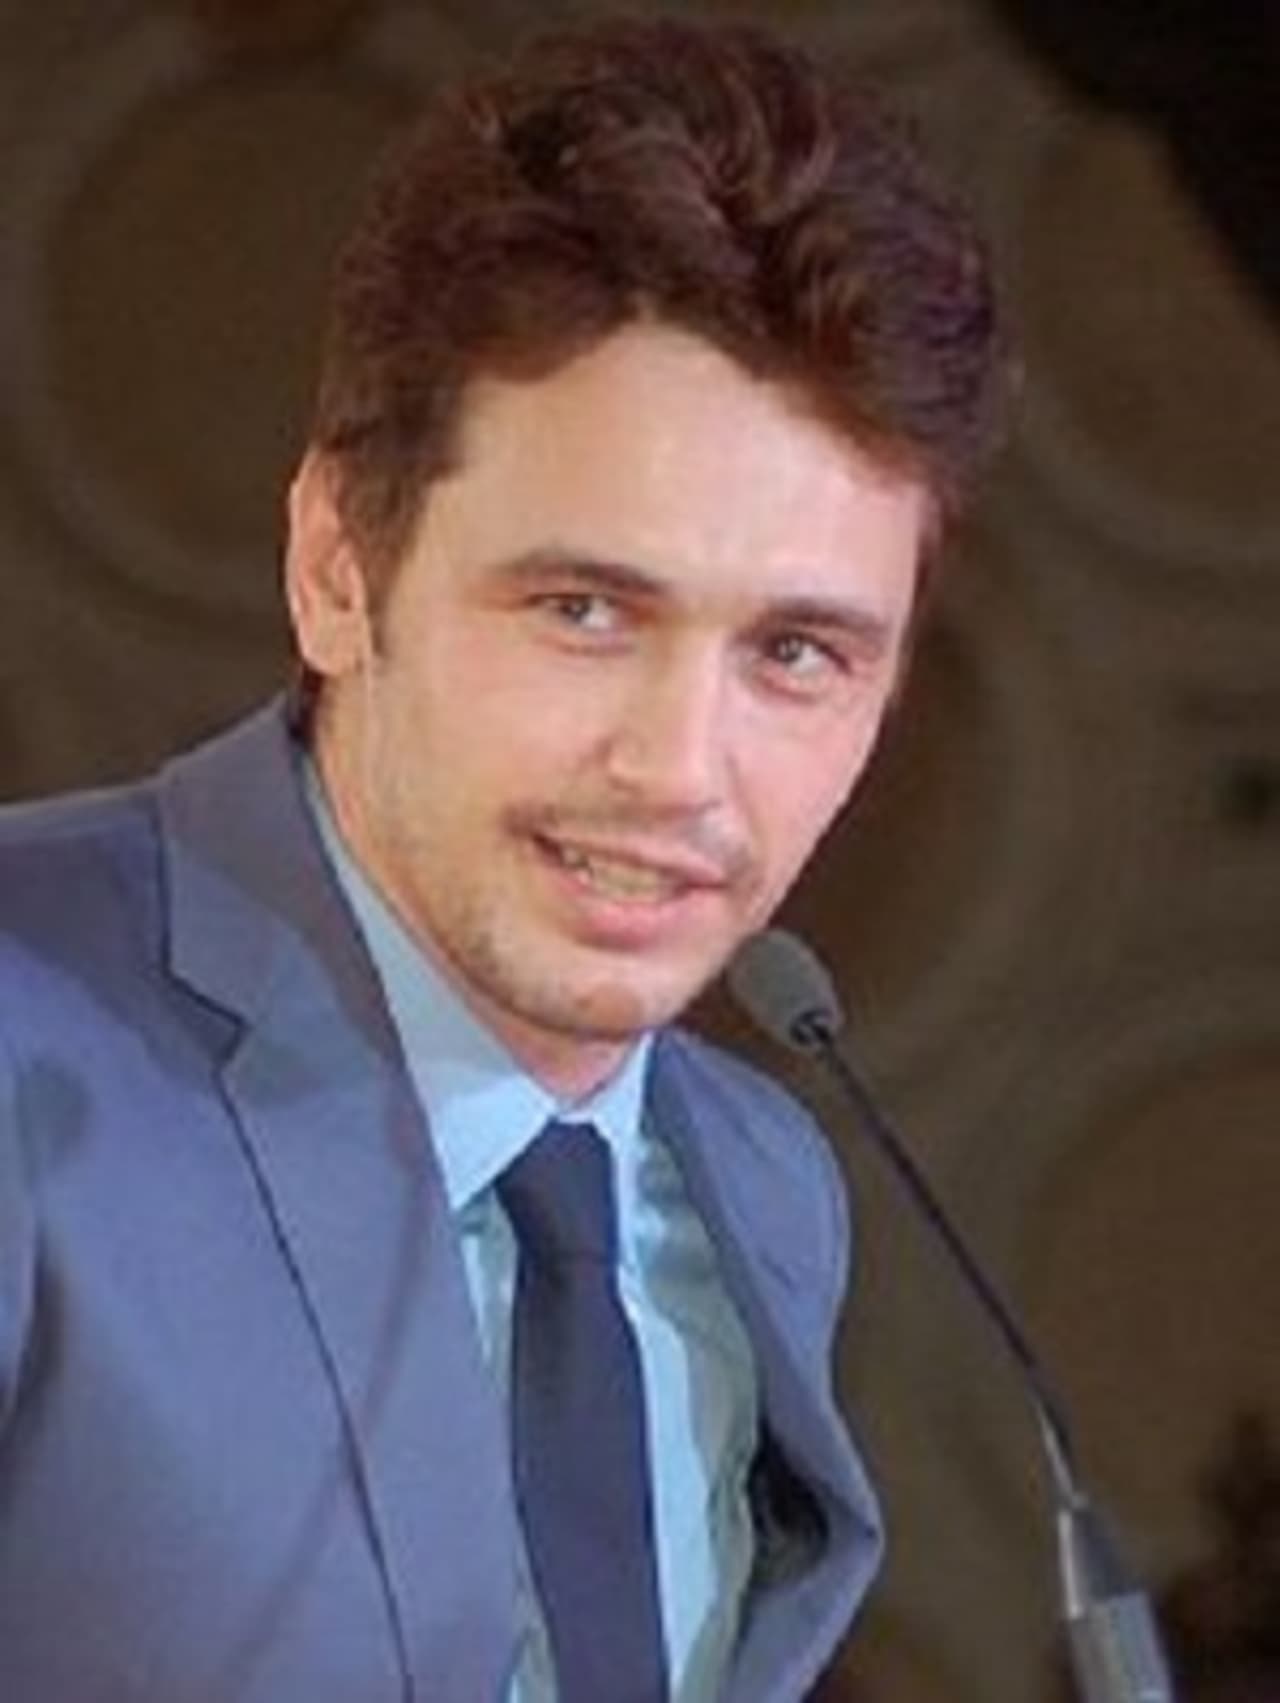 Actor James Franco was filming his new HBO series in Tappan.